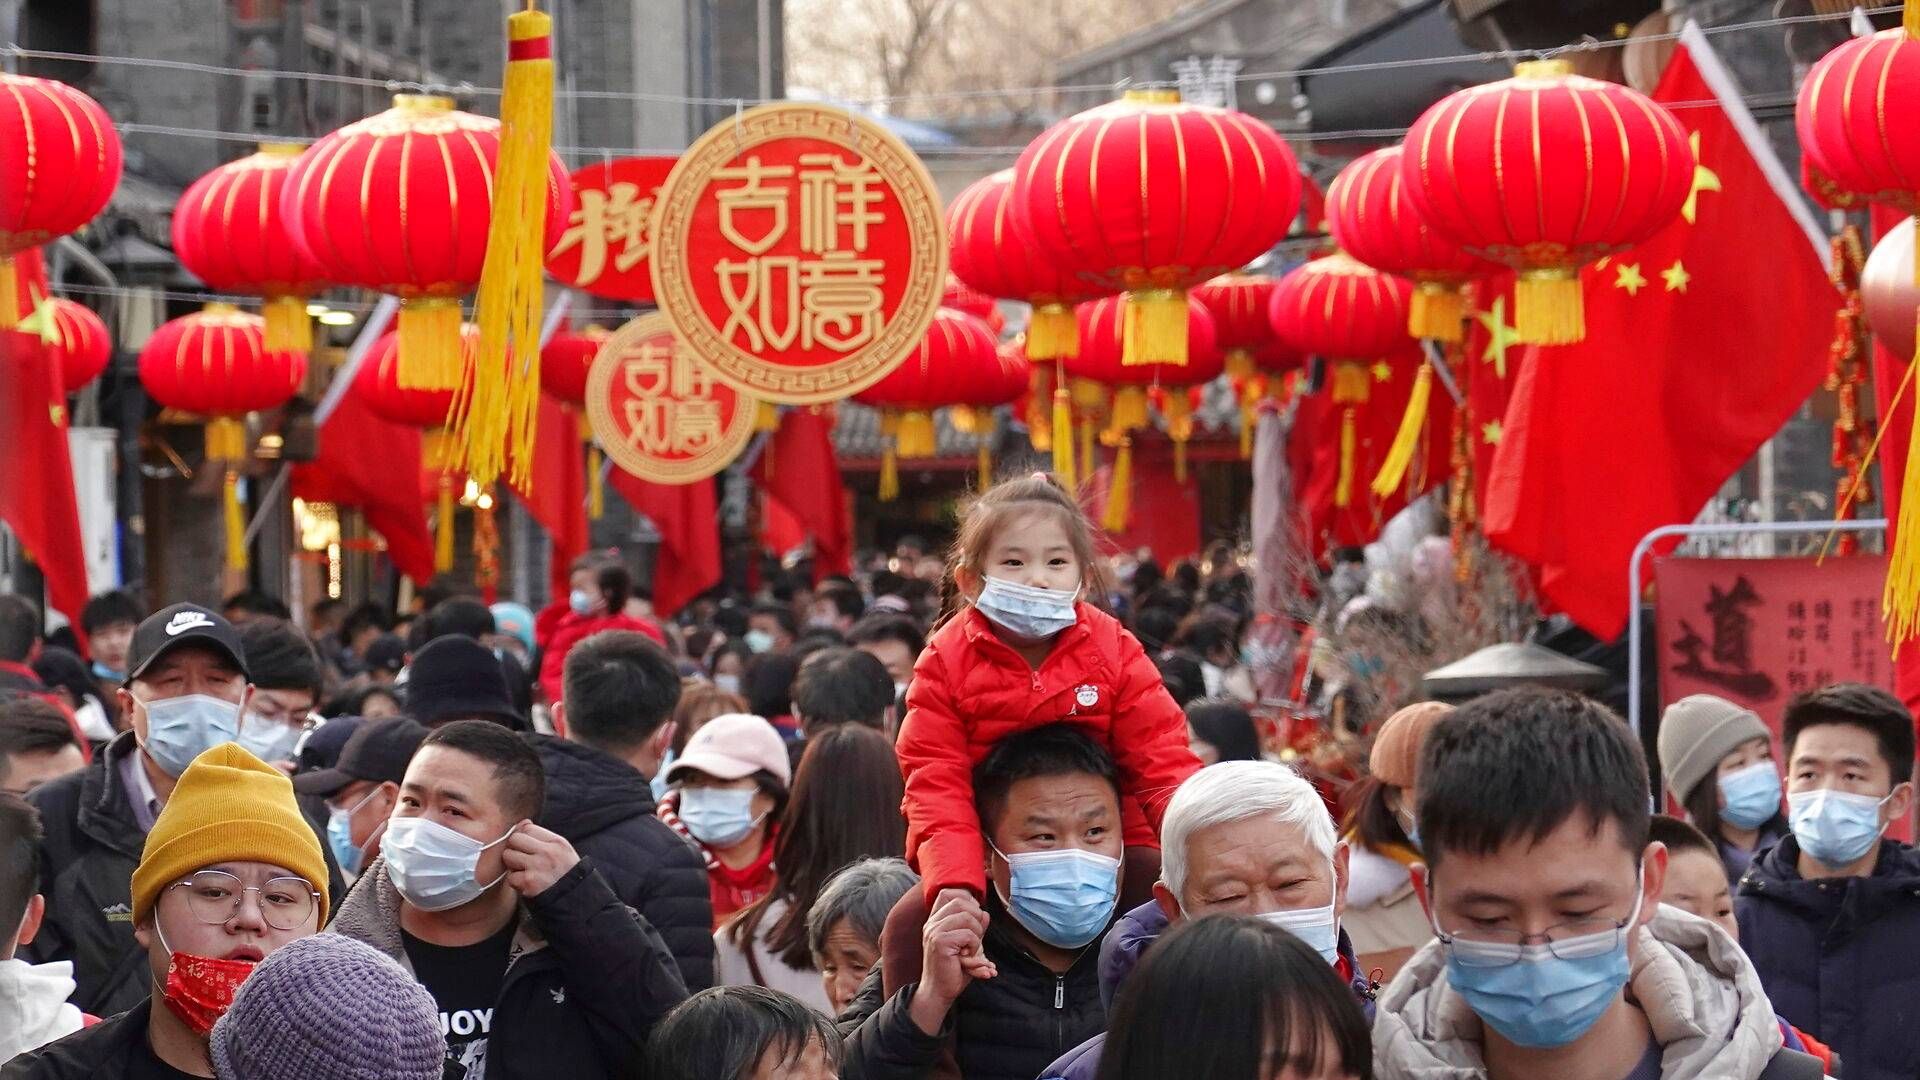 In 2021, Chinese New Year celebrations were marked by the pandemic. Freight volumes usually decline during this time, but carriers have no intentions of reducing capacity this year. | Photo: Tang Ke/AP/Ritzau Scanpix